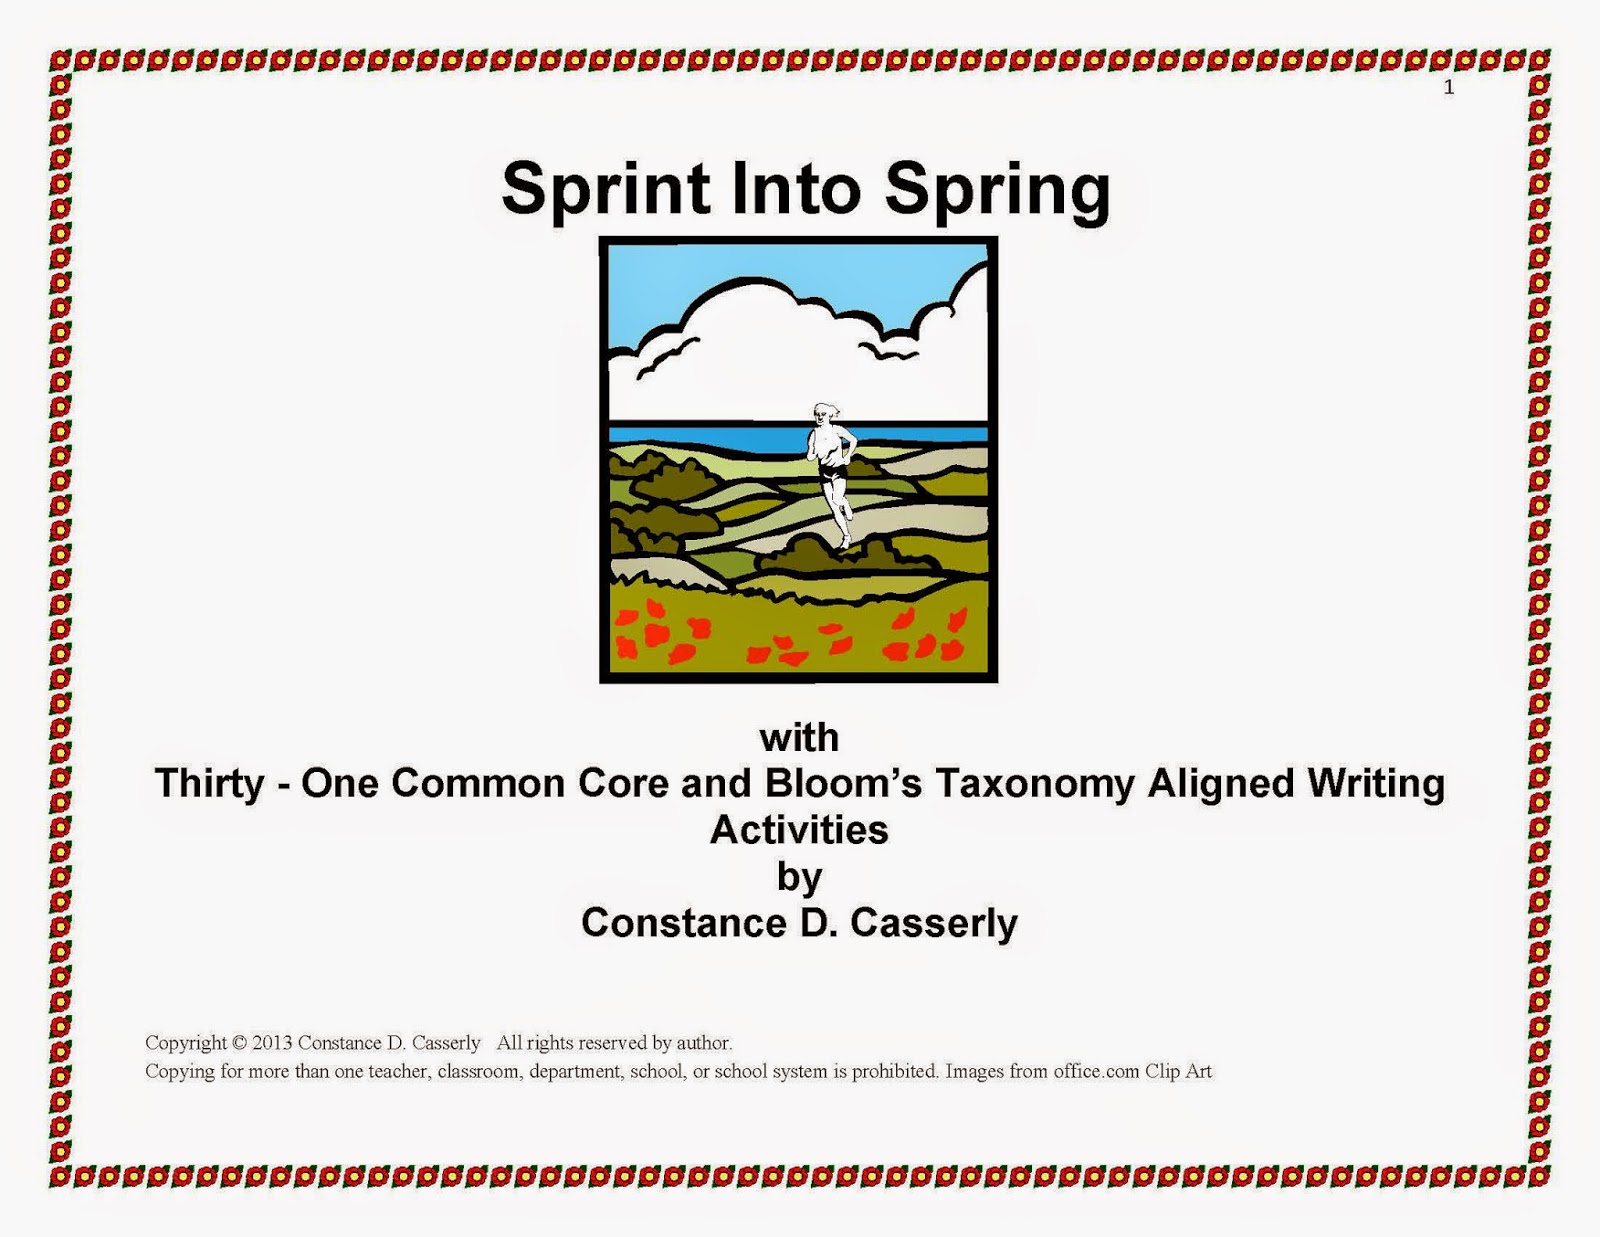 31 ELA Writing Activities - "March Maneuvers - Sprint Into Spring"